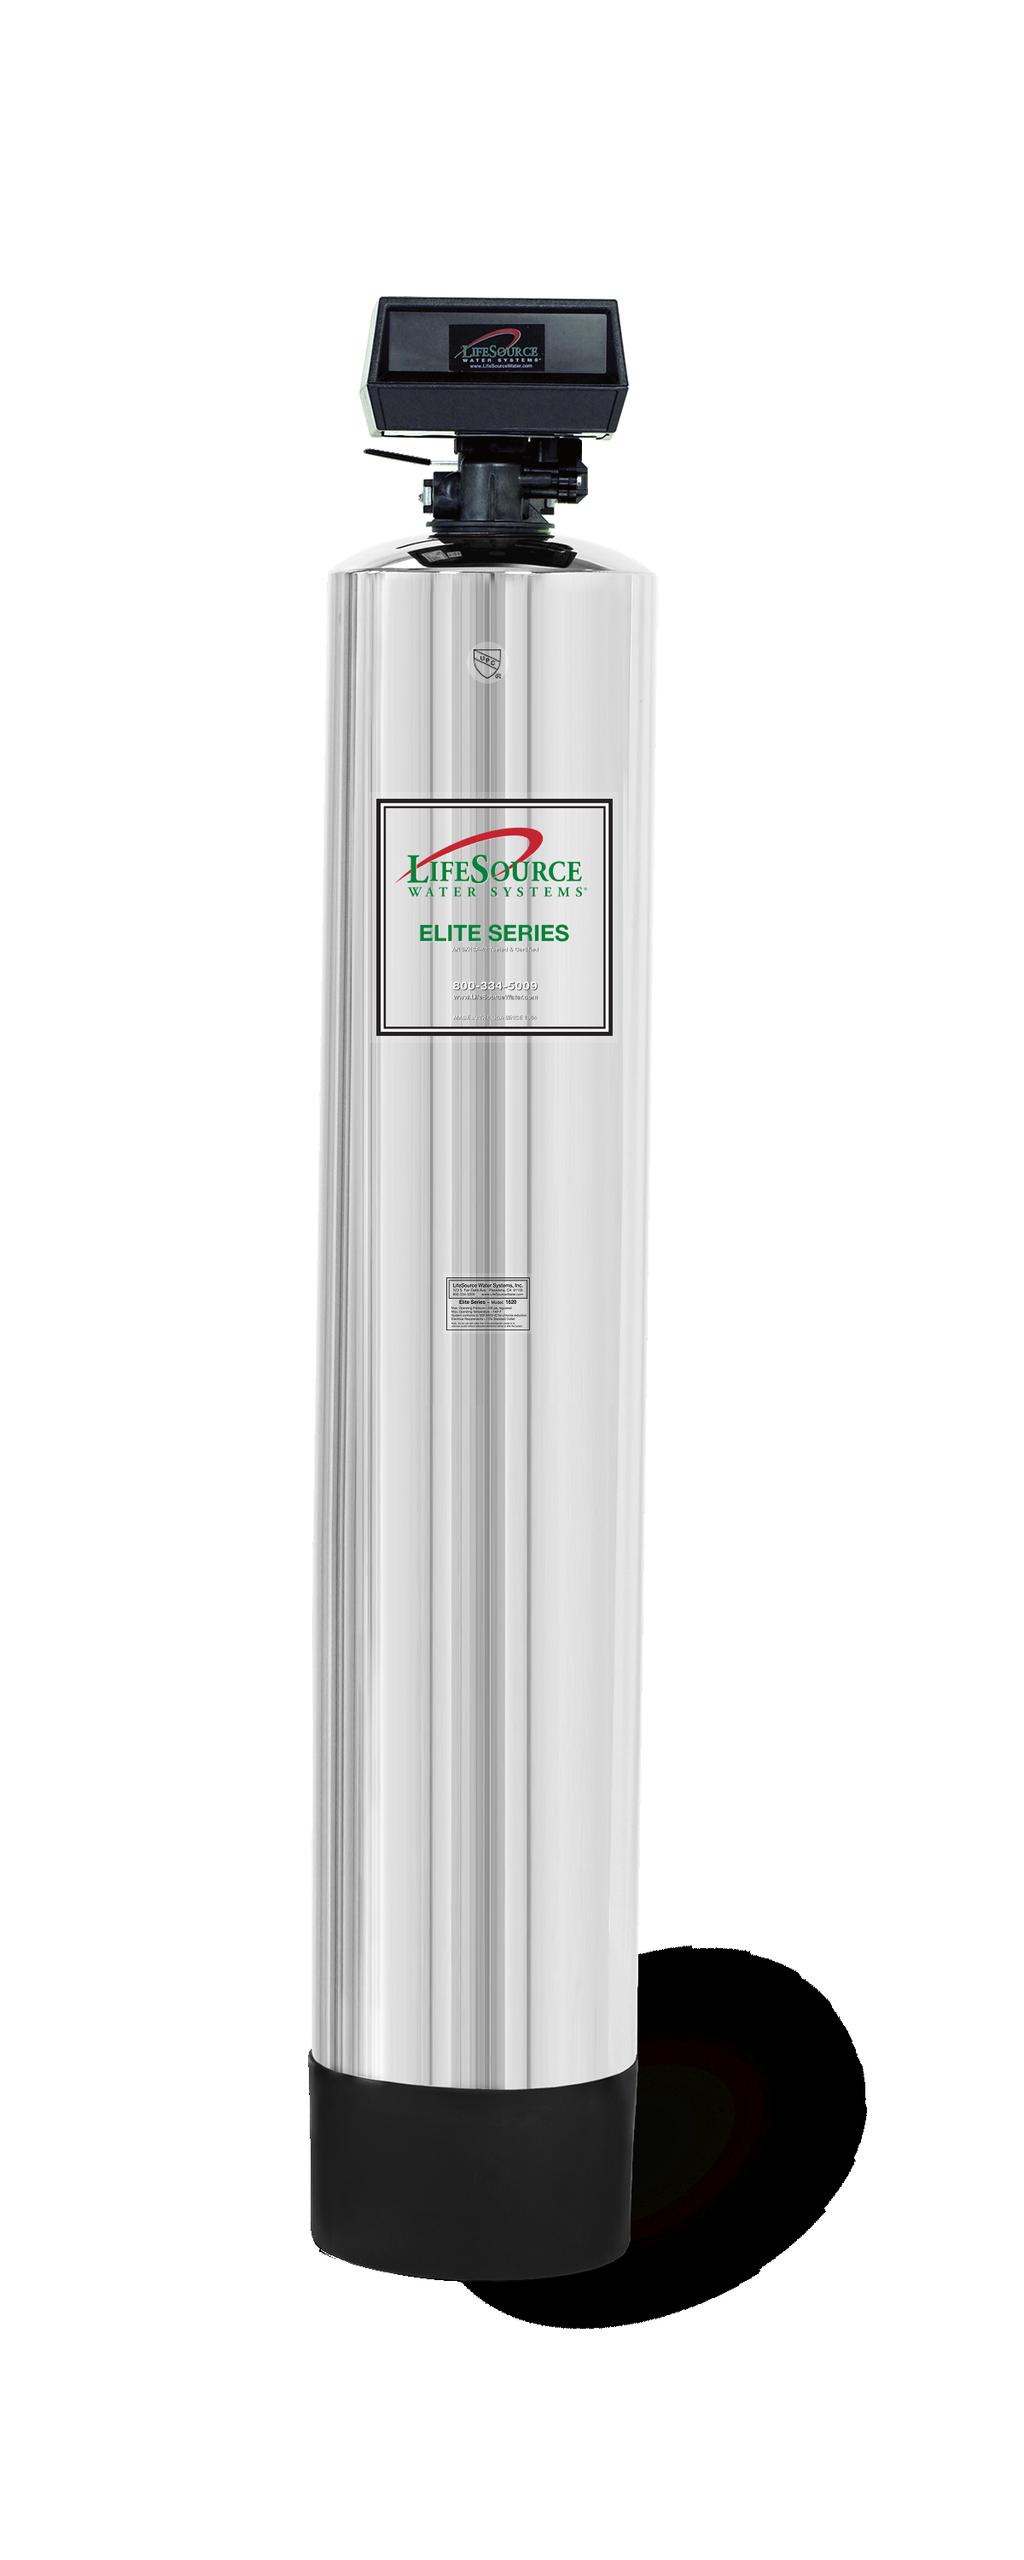 Equipment Specifications 1620 S For - 1 And 1620 E For 1 Water Mains Water Filter Specifications The Elite 1620 S & E water filtration system is a no maintenance, whole house water filtration system.